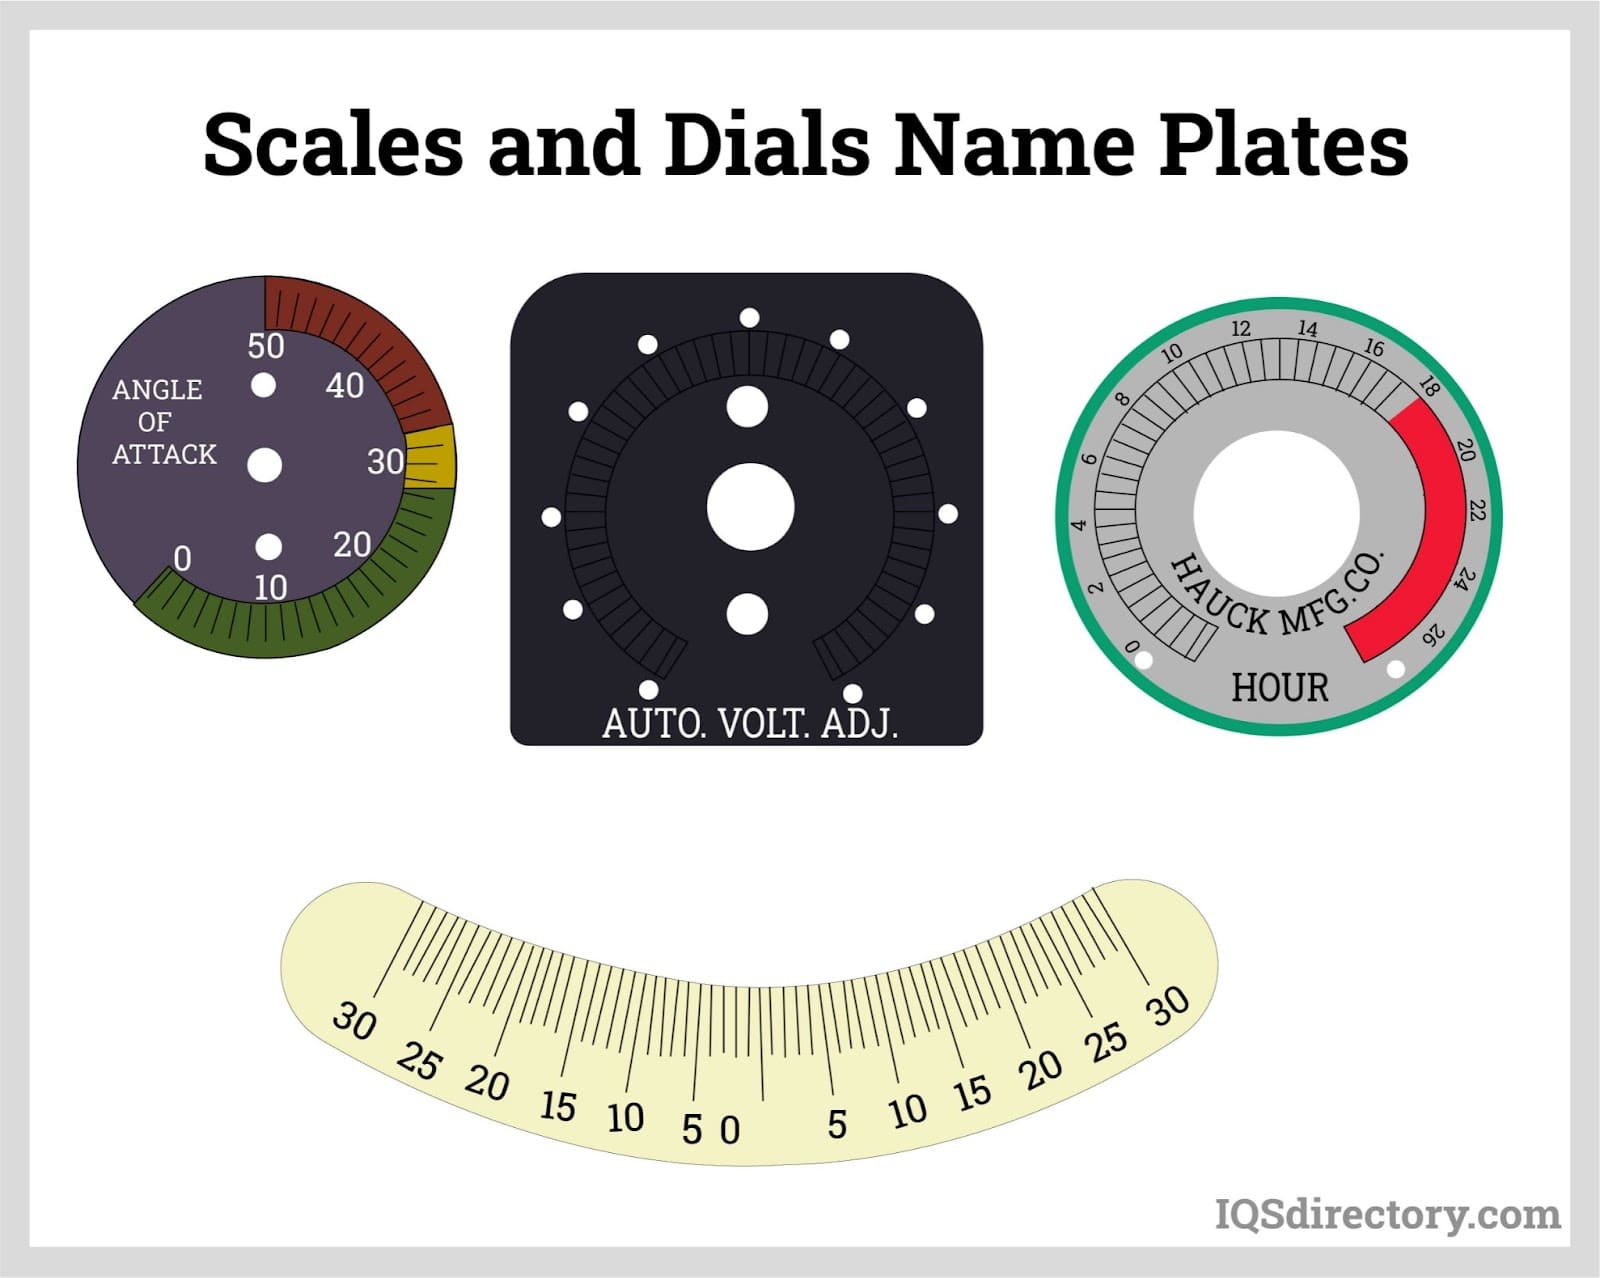 Scales and Dials Name Plates